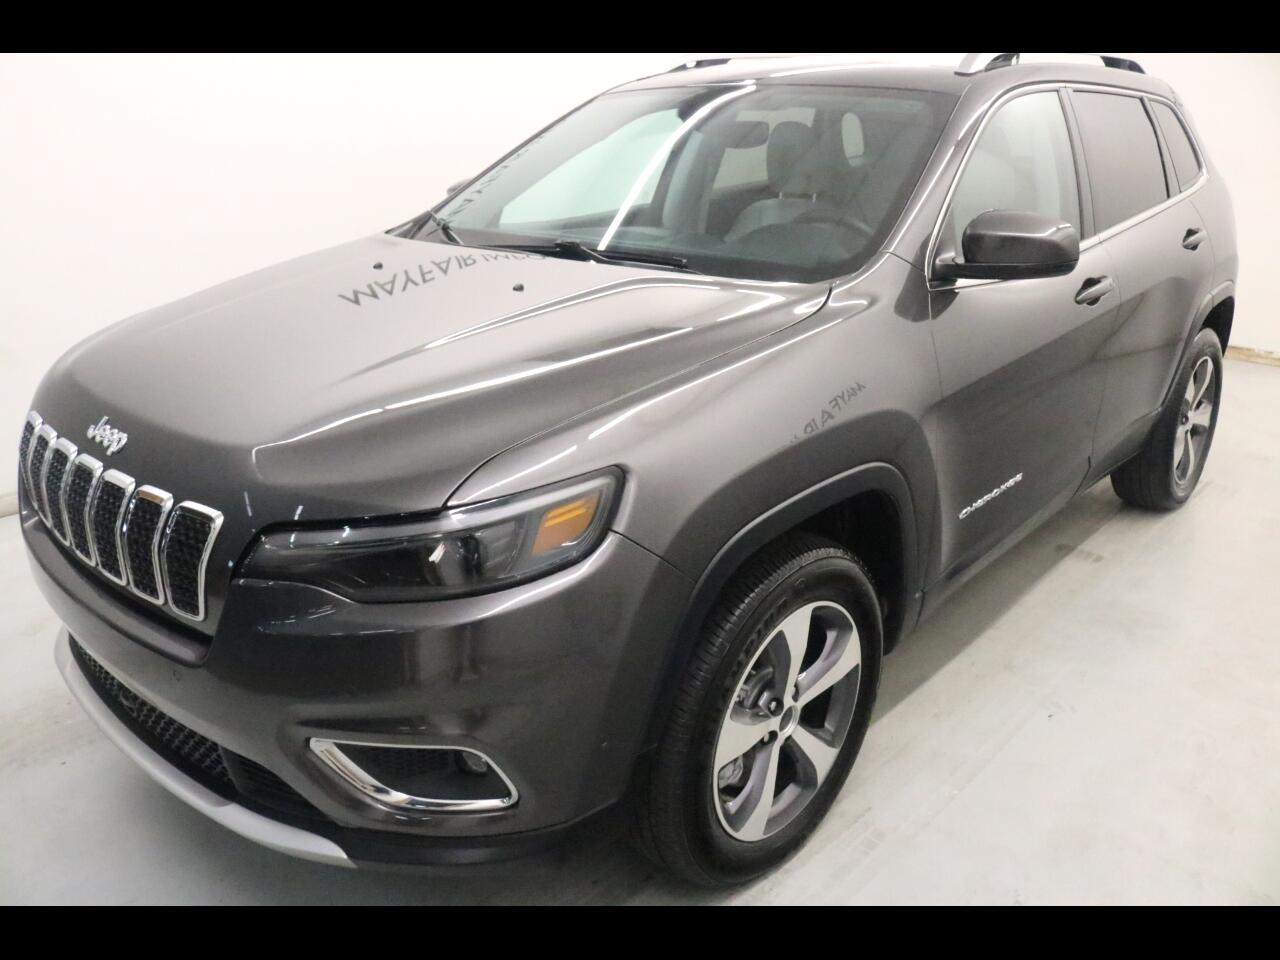 Jeep Cherokee Limited 4WD 2019